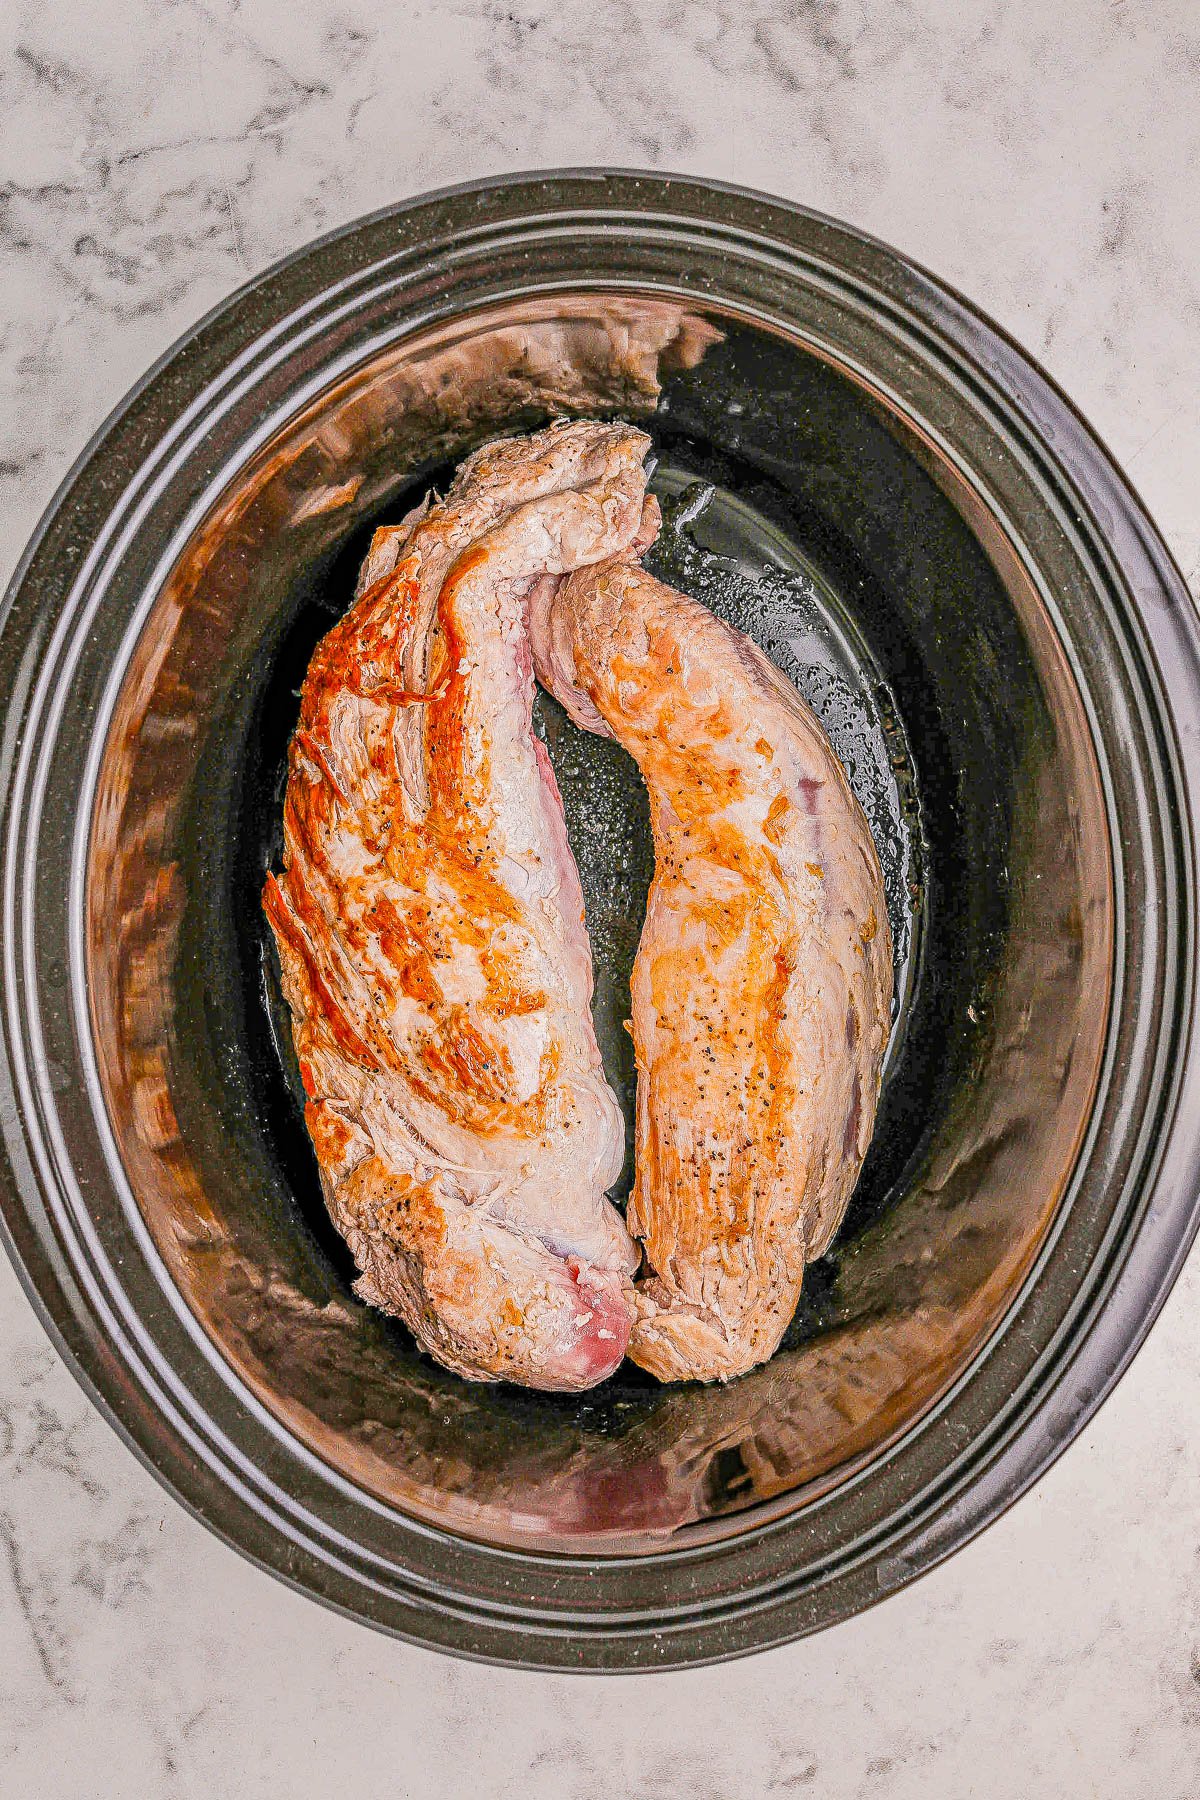 A raw, seasoned piece of meat placed inside a black slow cooker.